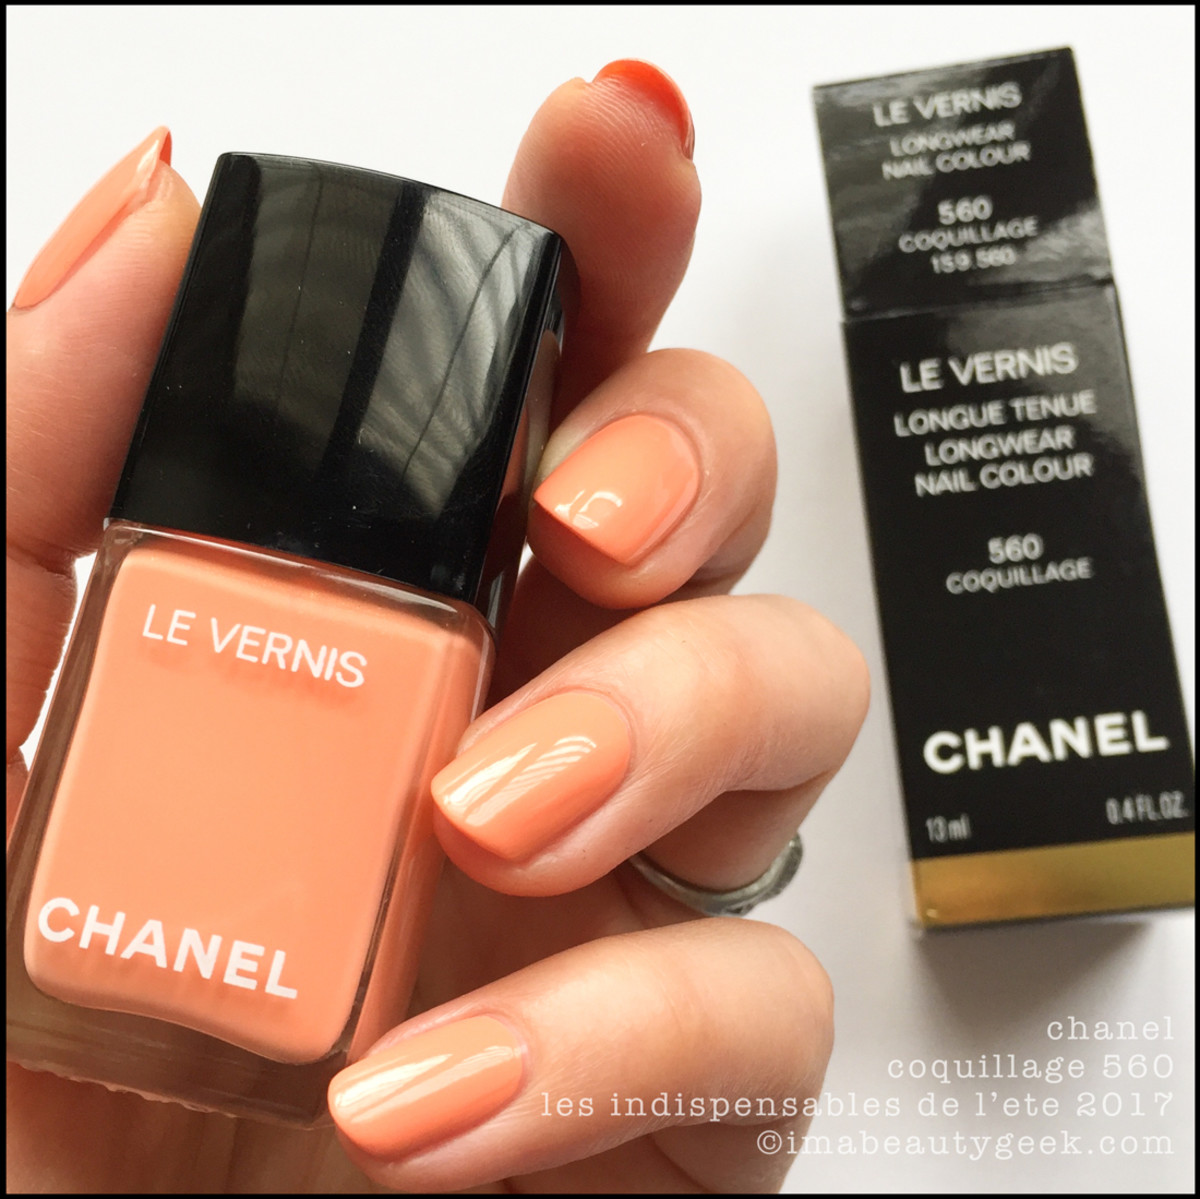 Chanel Coquillage 560 - Chanel Cruise Summer 2017